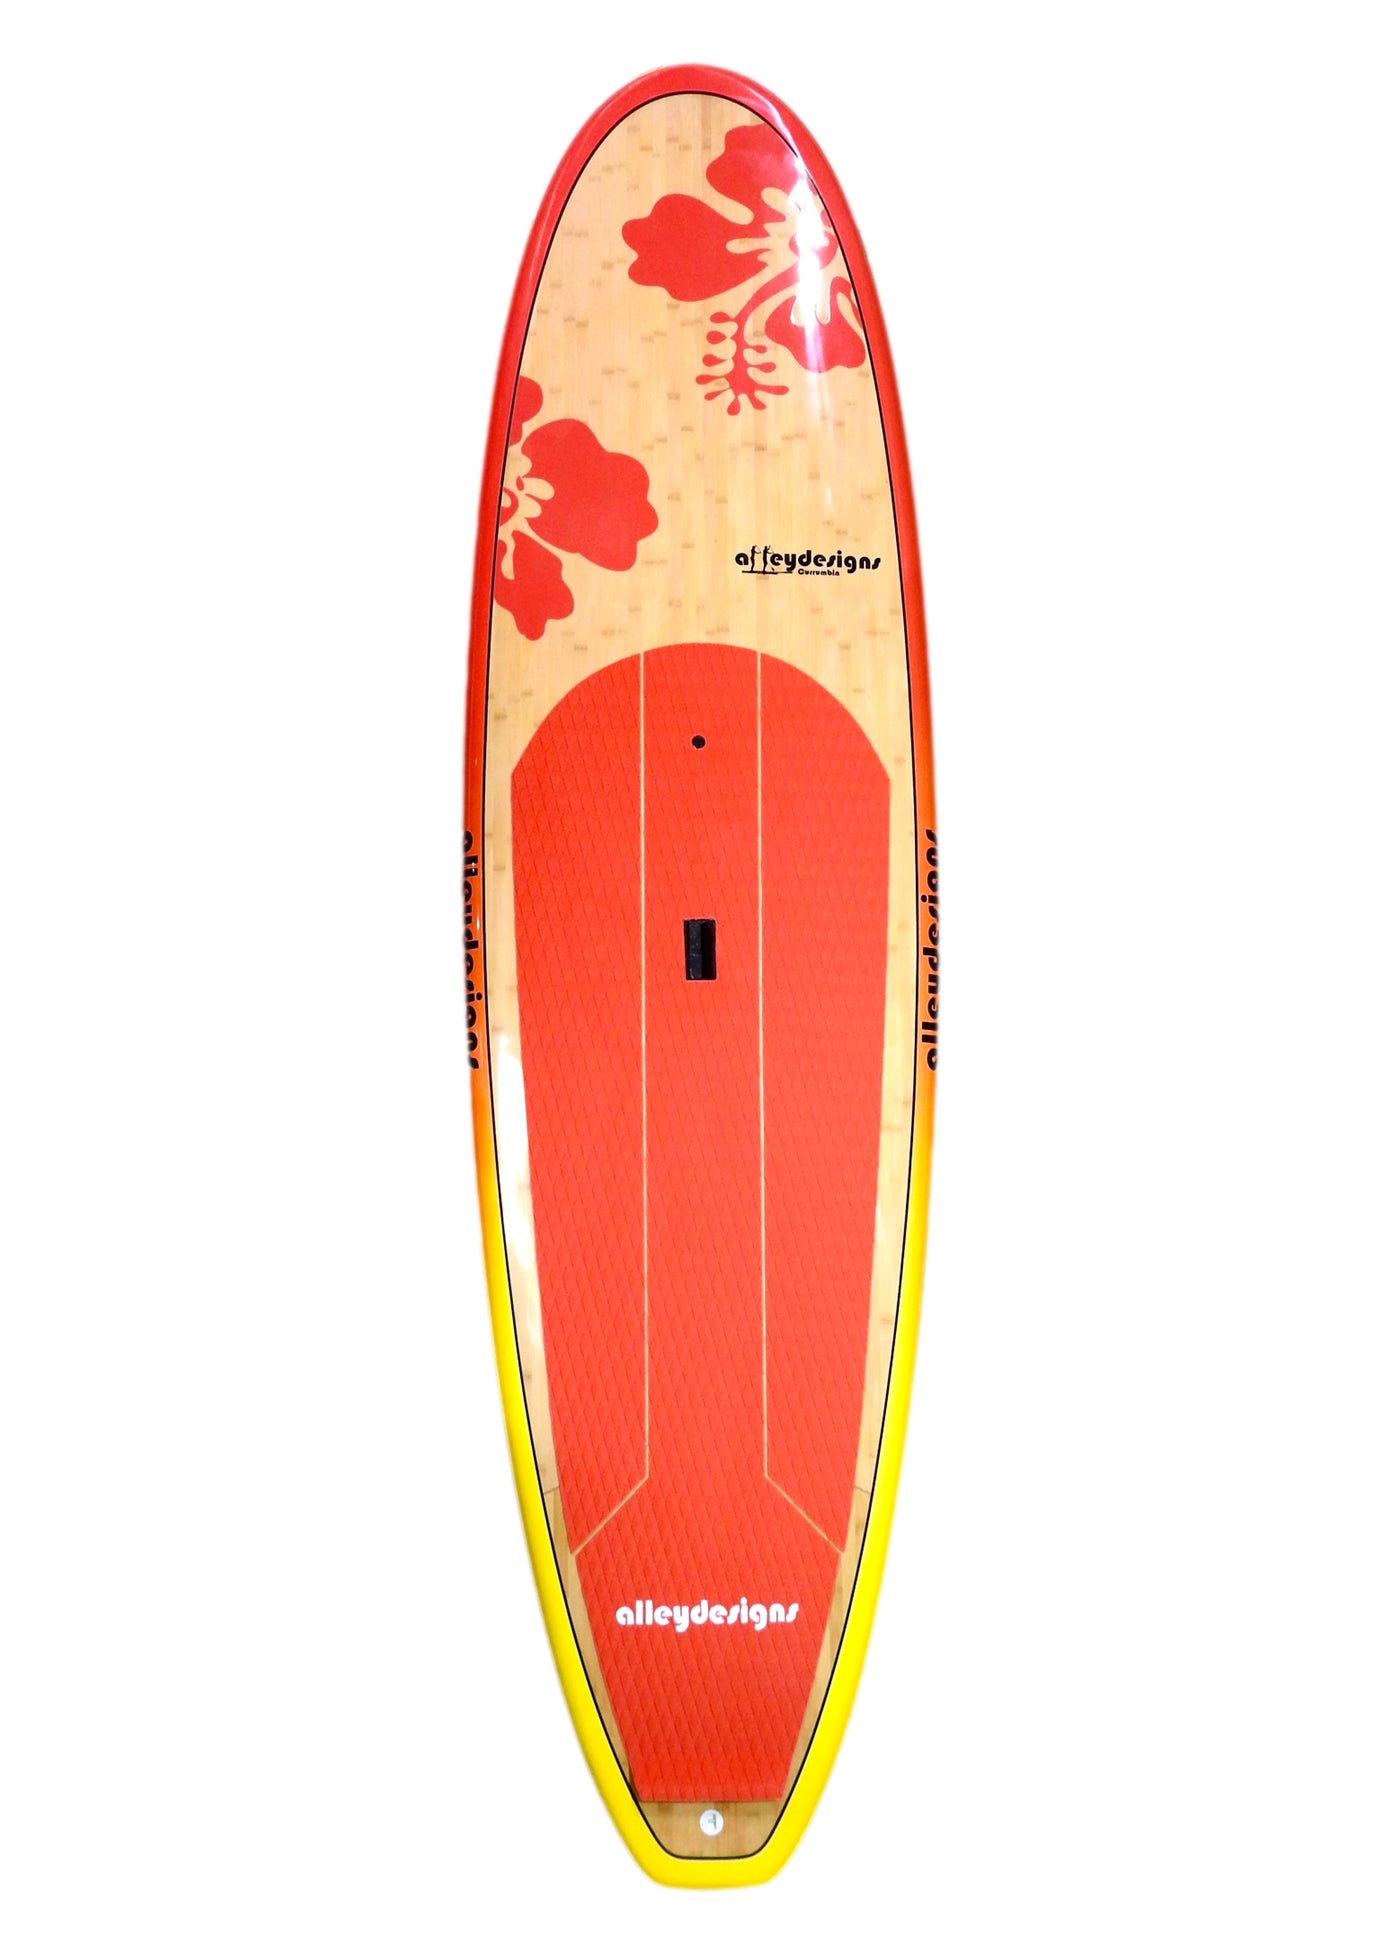 10' x 32" Bamboo Sunrise Classic Alleydesigns SUP 9KG - Alleydesigns  Pty Ltd                                             ABN: 44165571264